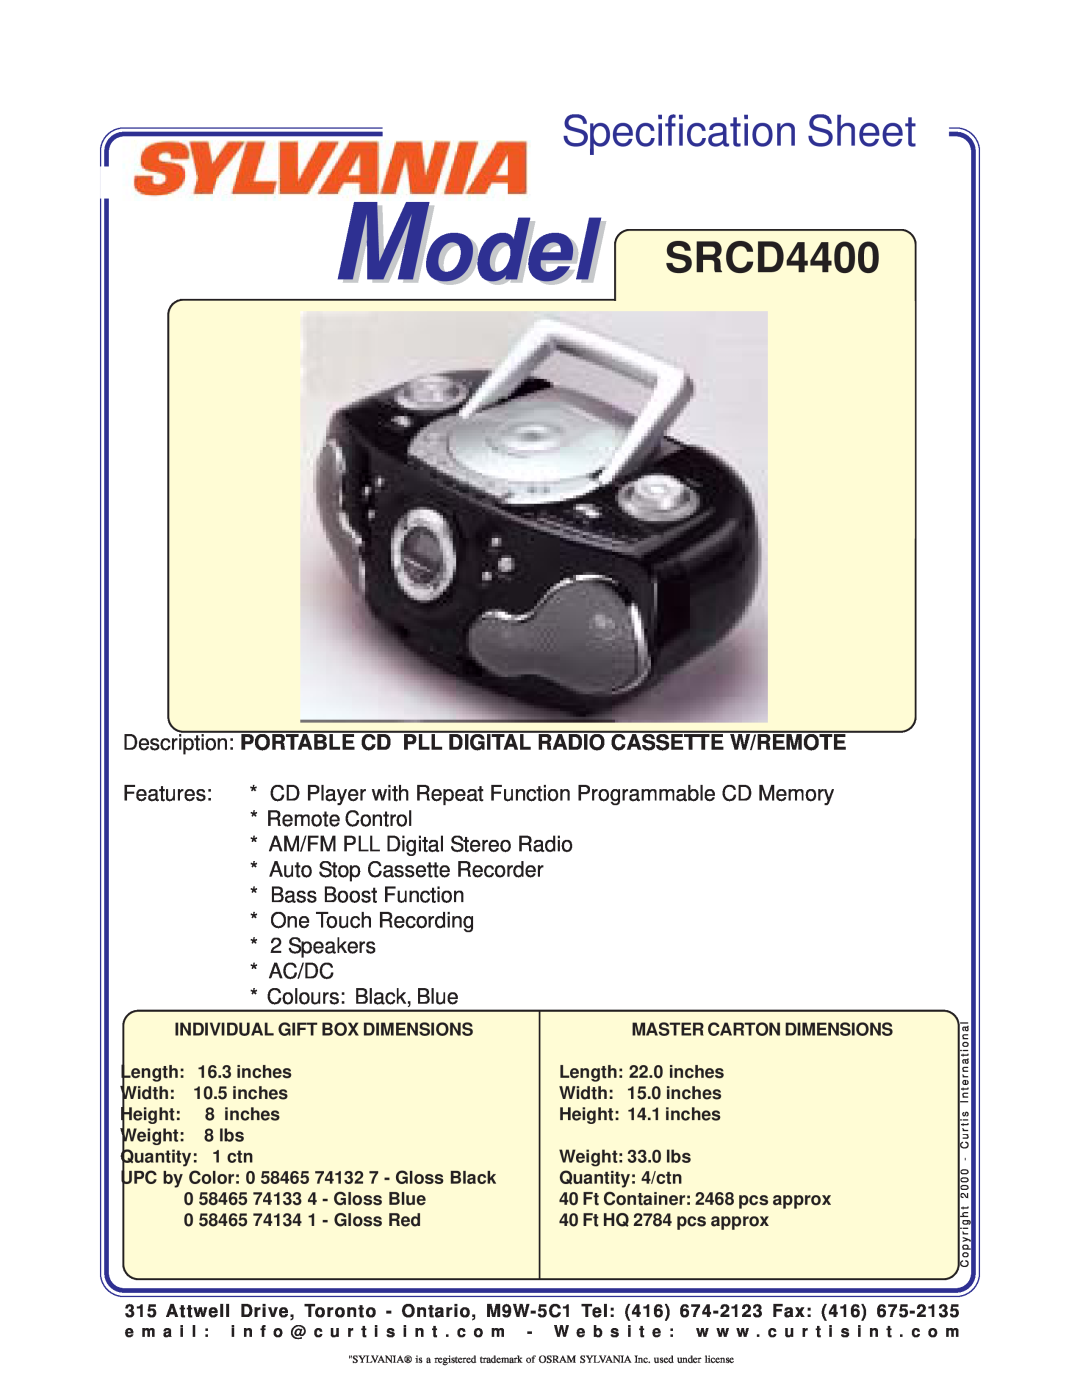 Sylvania specifications Specification Sheet, Model SRCD4400, Place Image Here, One Touch Recording 2 Speakers AC/DC 